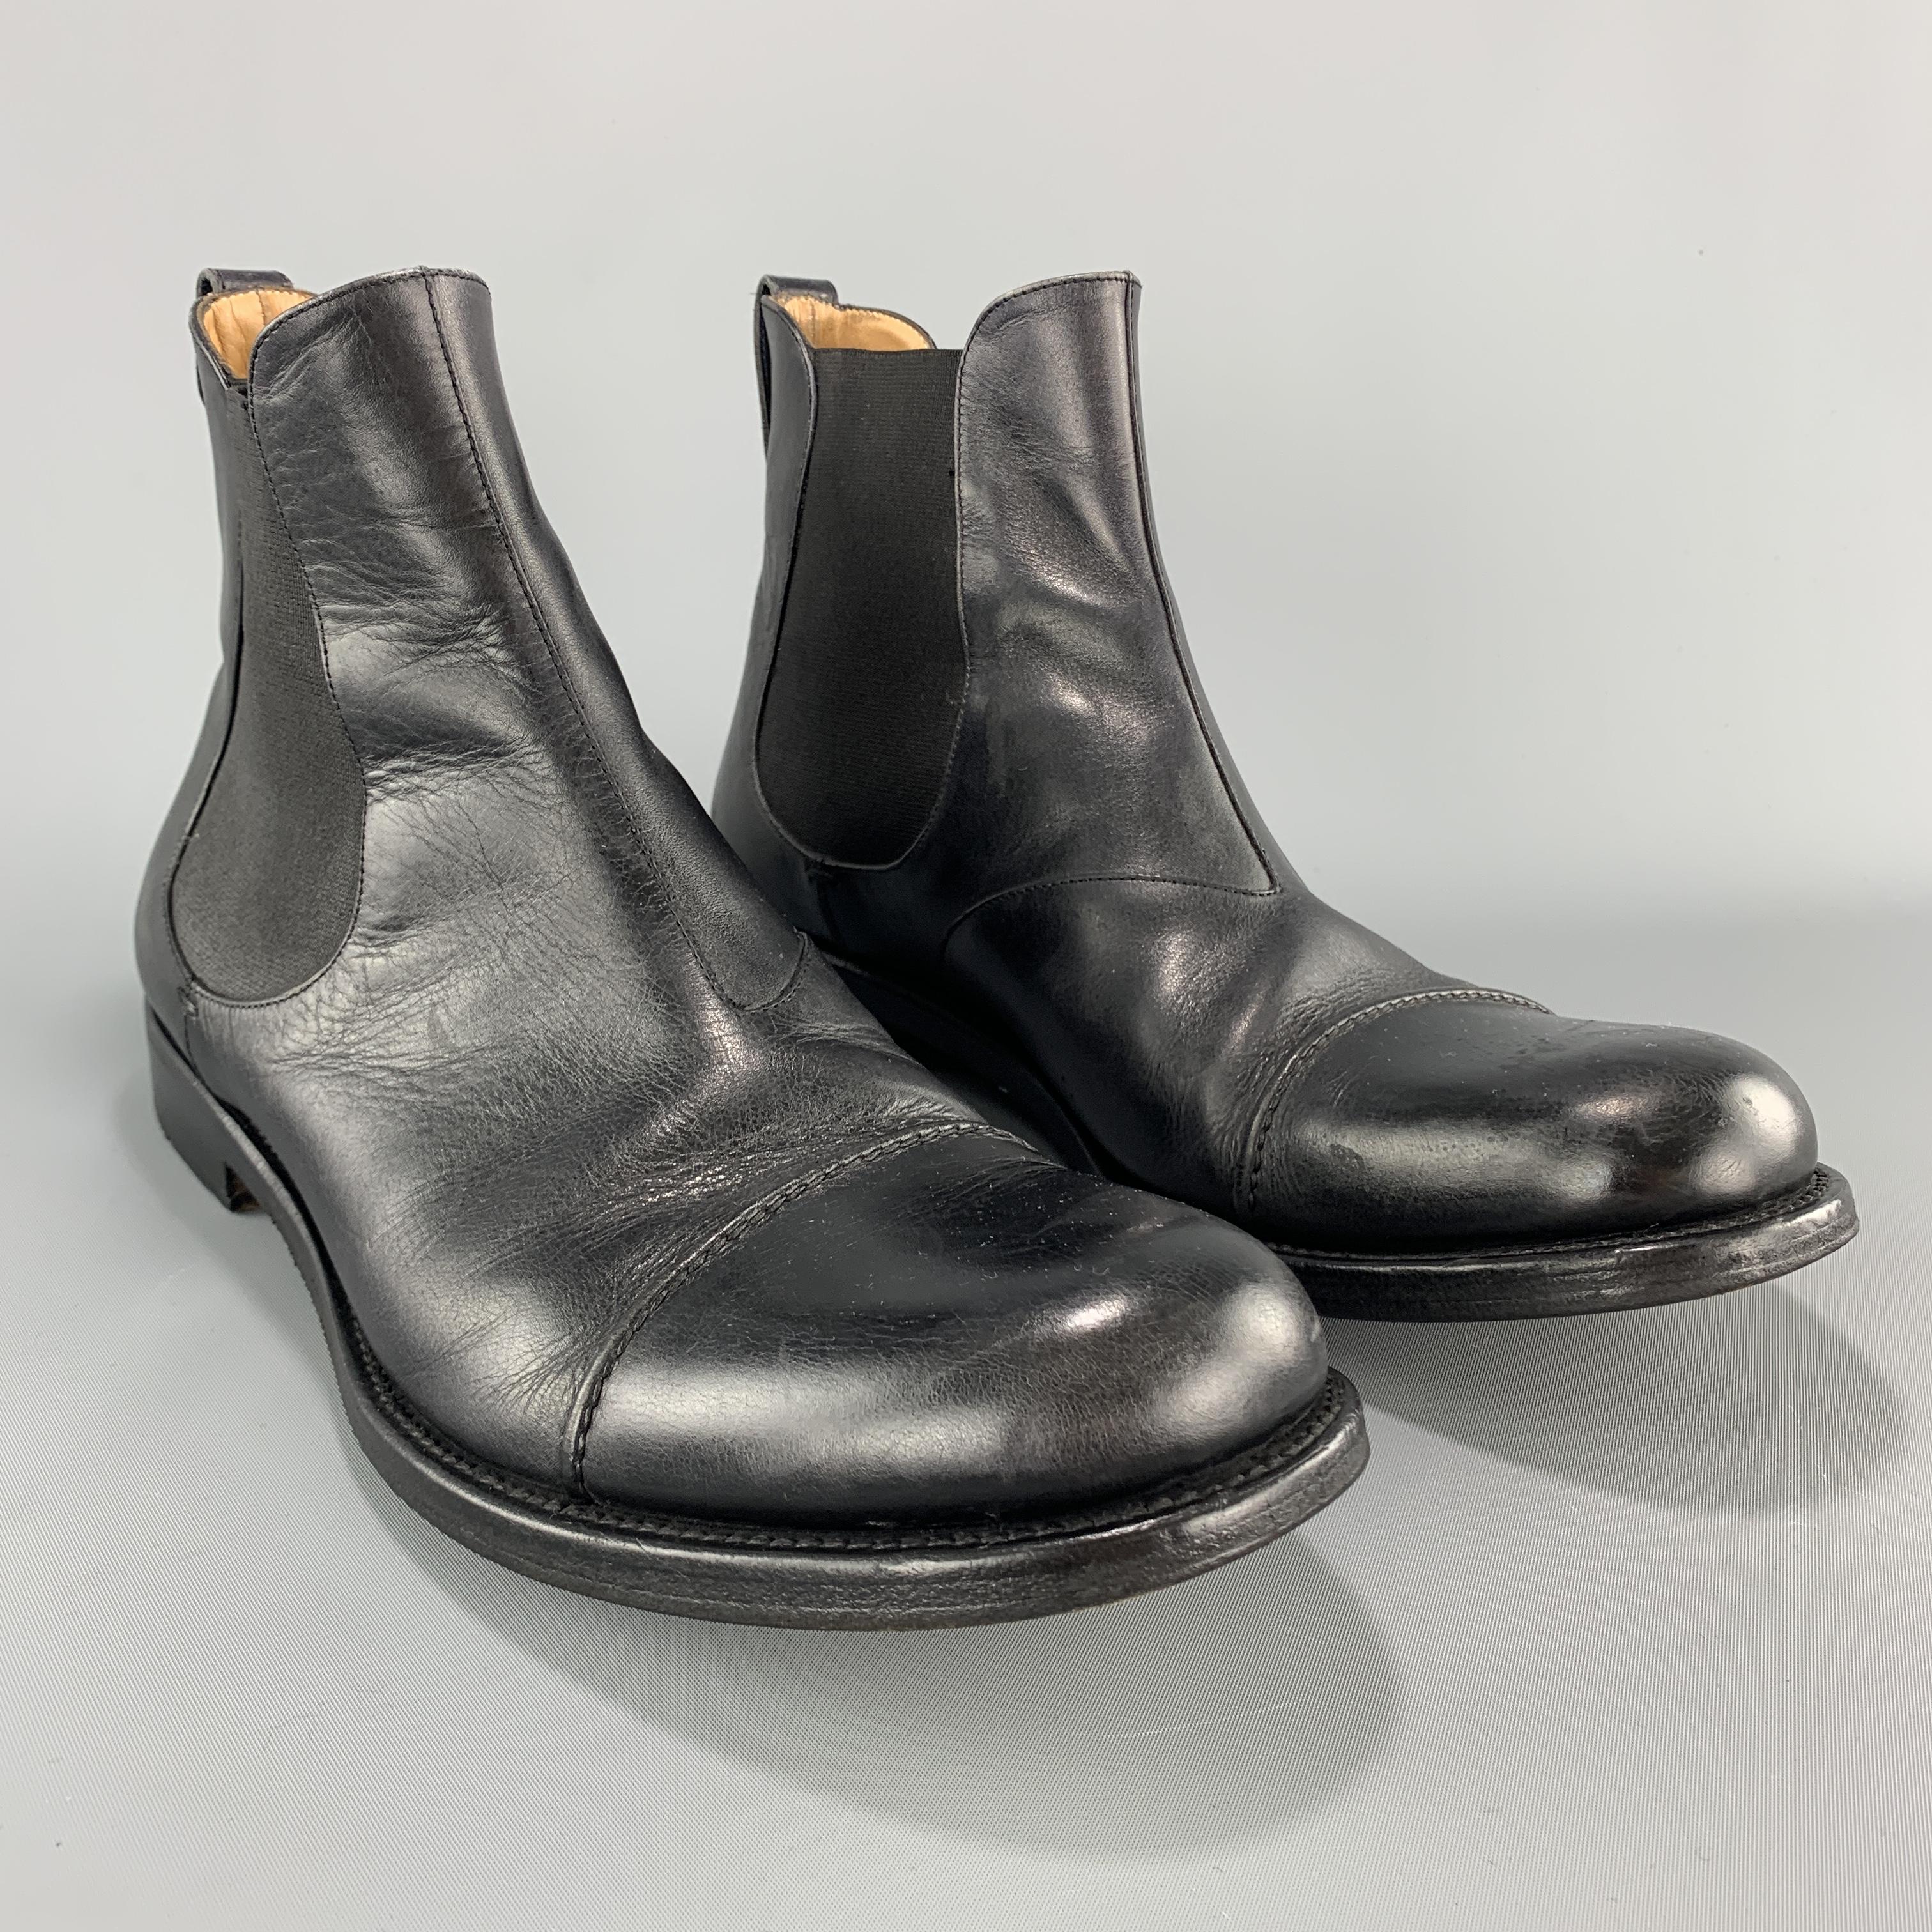 YVES SAINT LAURENT chelsea boots come in smooth black leather with elastic sides and toe cap. Made in Italy.

Very Good Pre-Owned Condition.
Marked: IT 42

Outsole: 12 x 4.5 in.